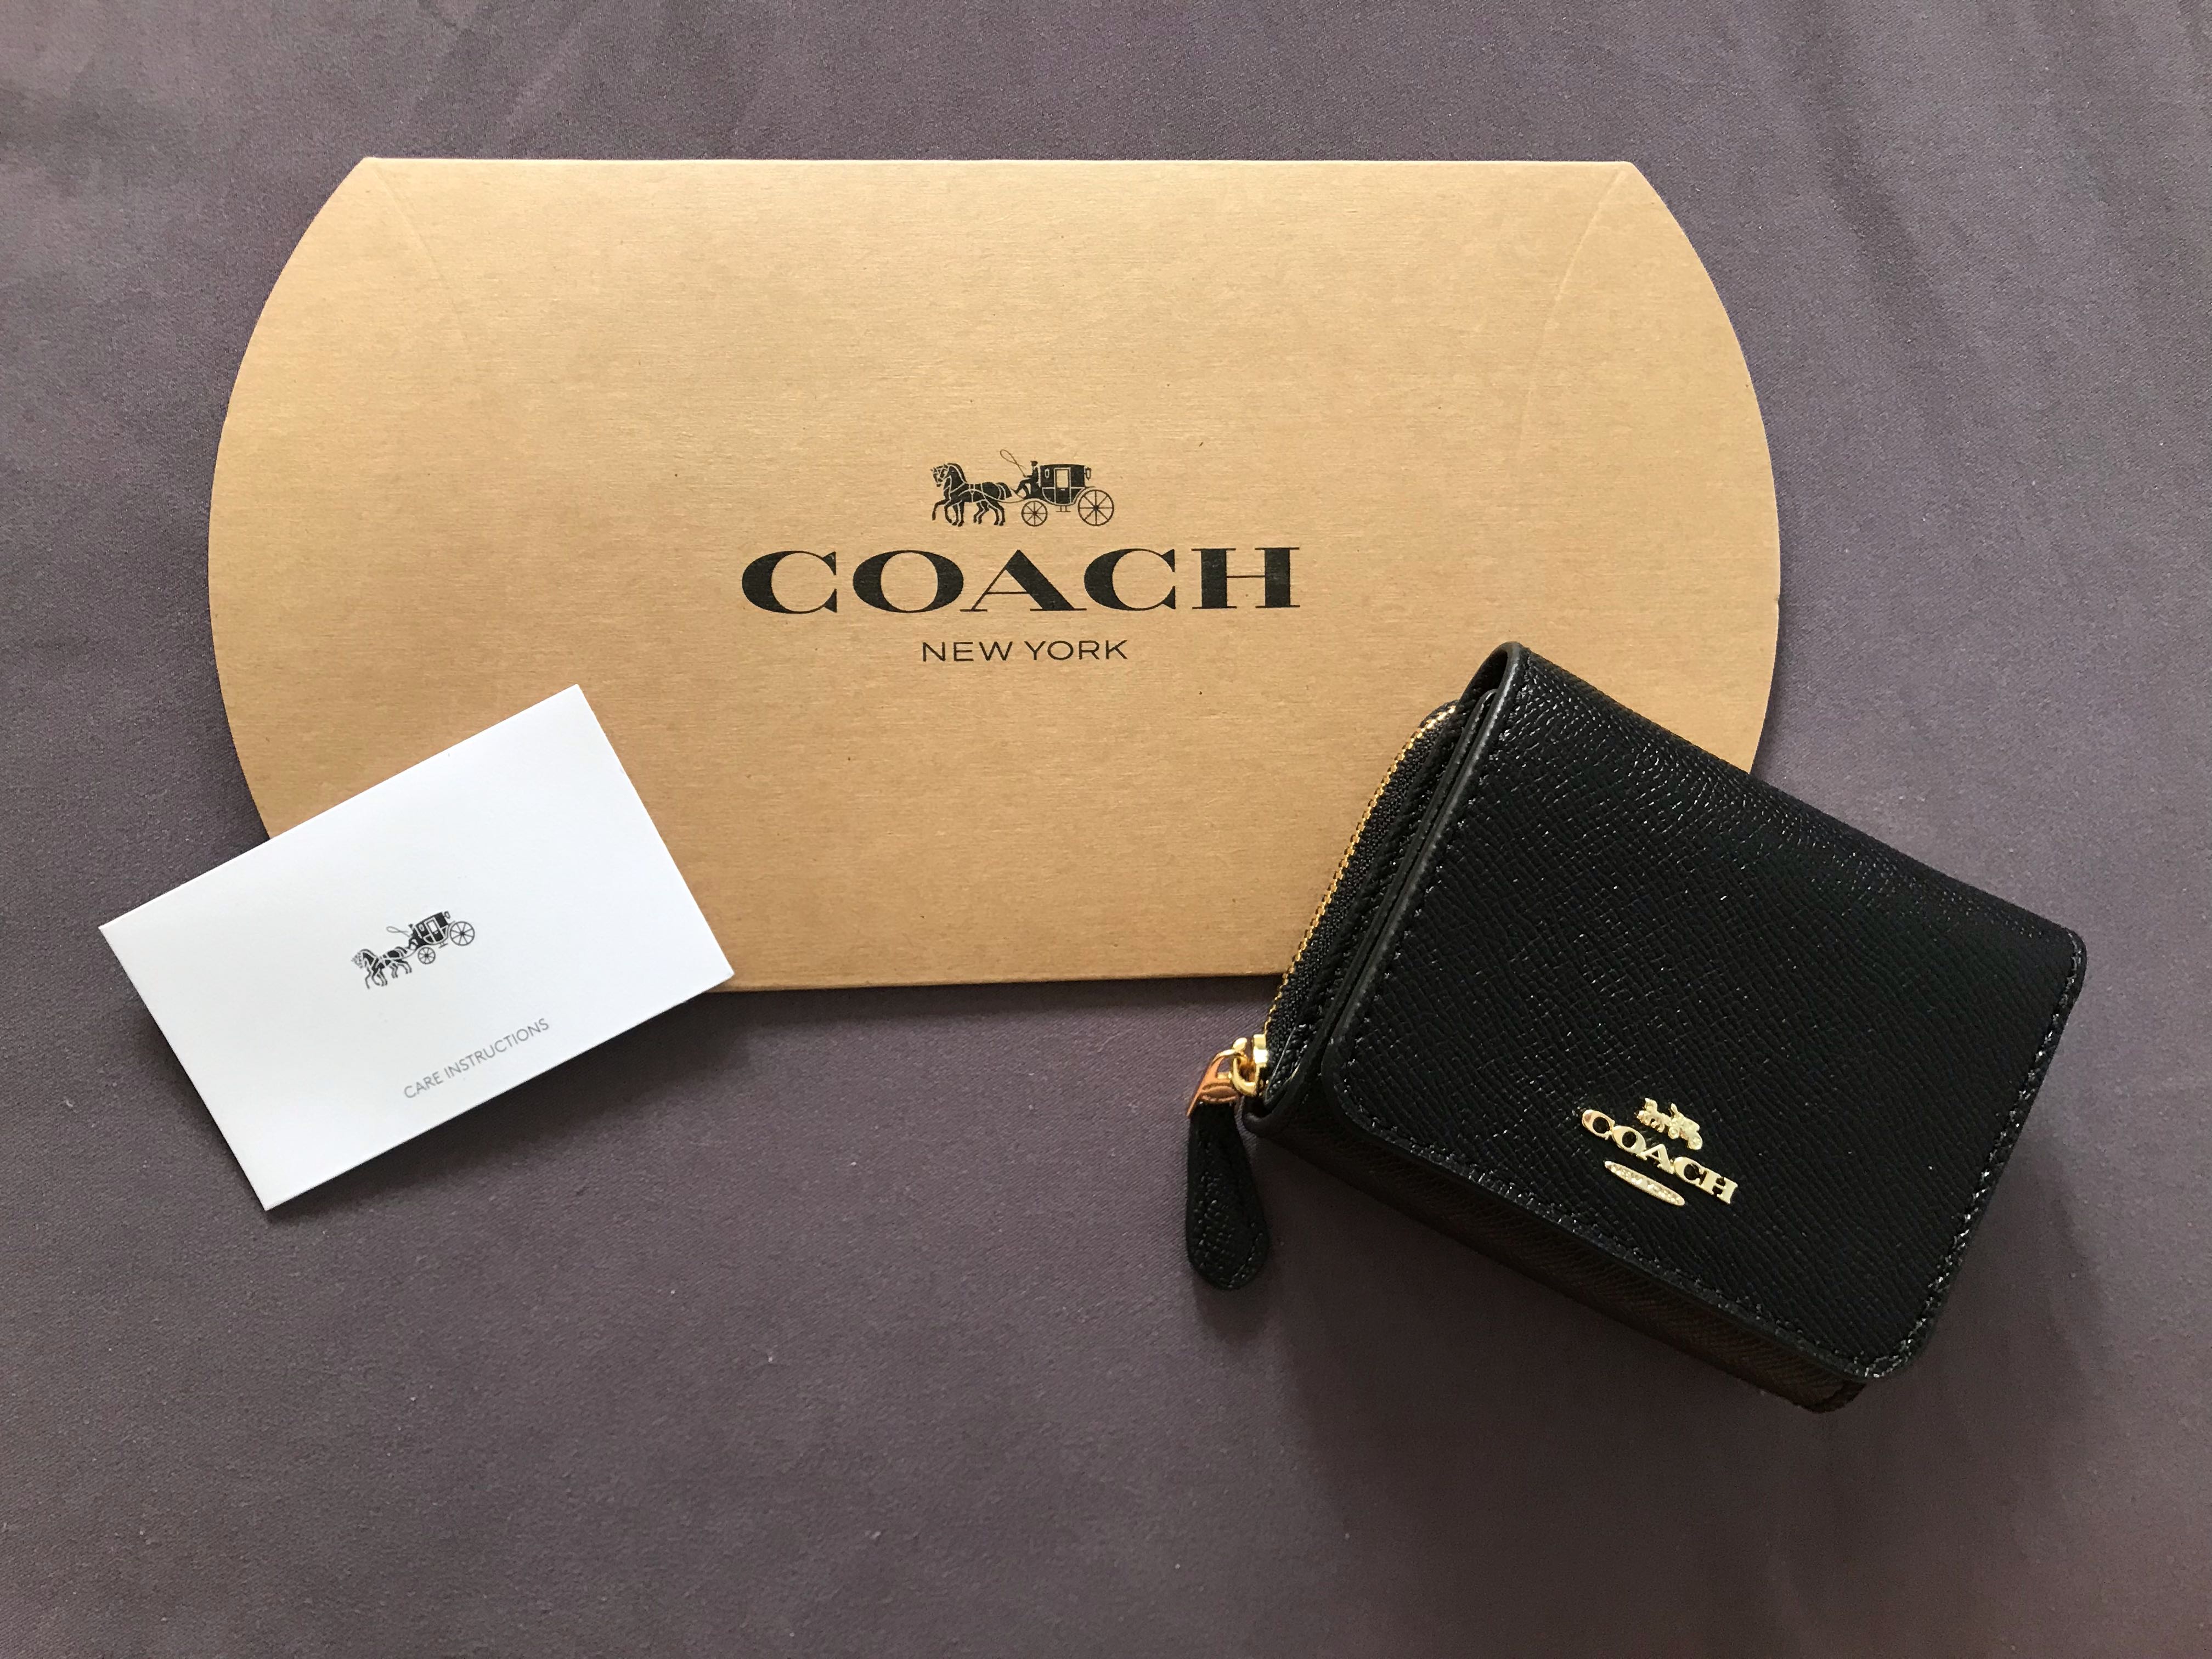 Coach F37968 Small Trifold Wallet In Crossgrain Leather - White